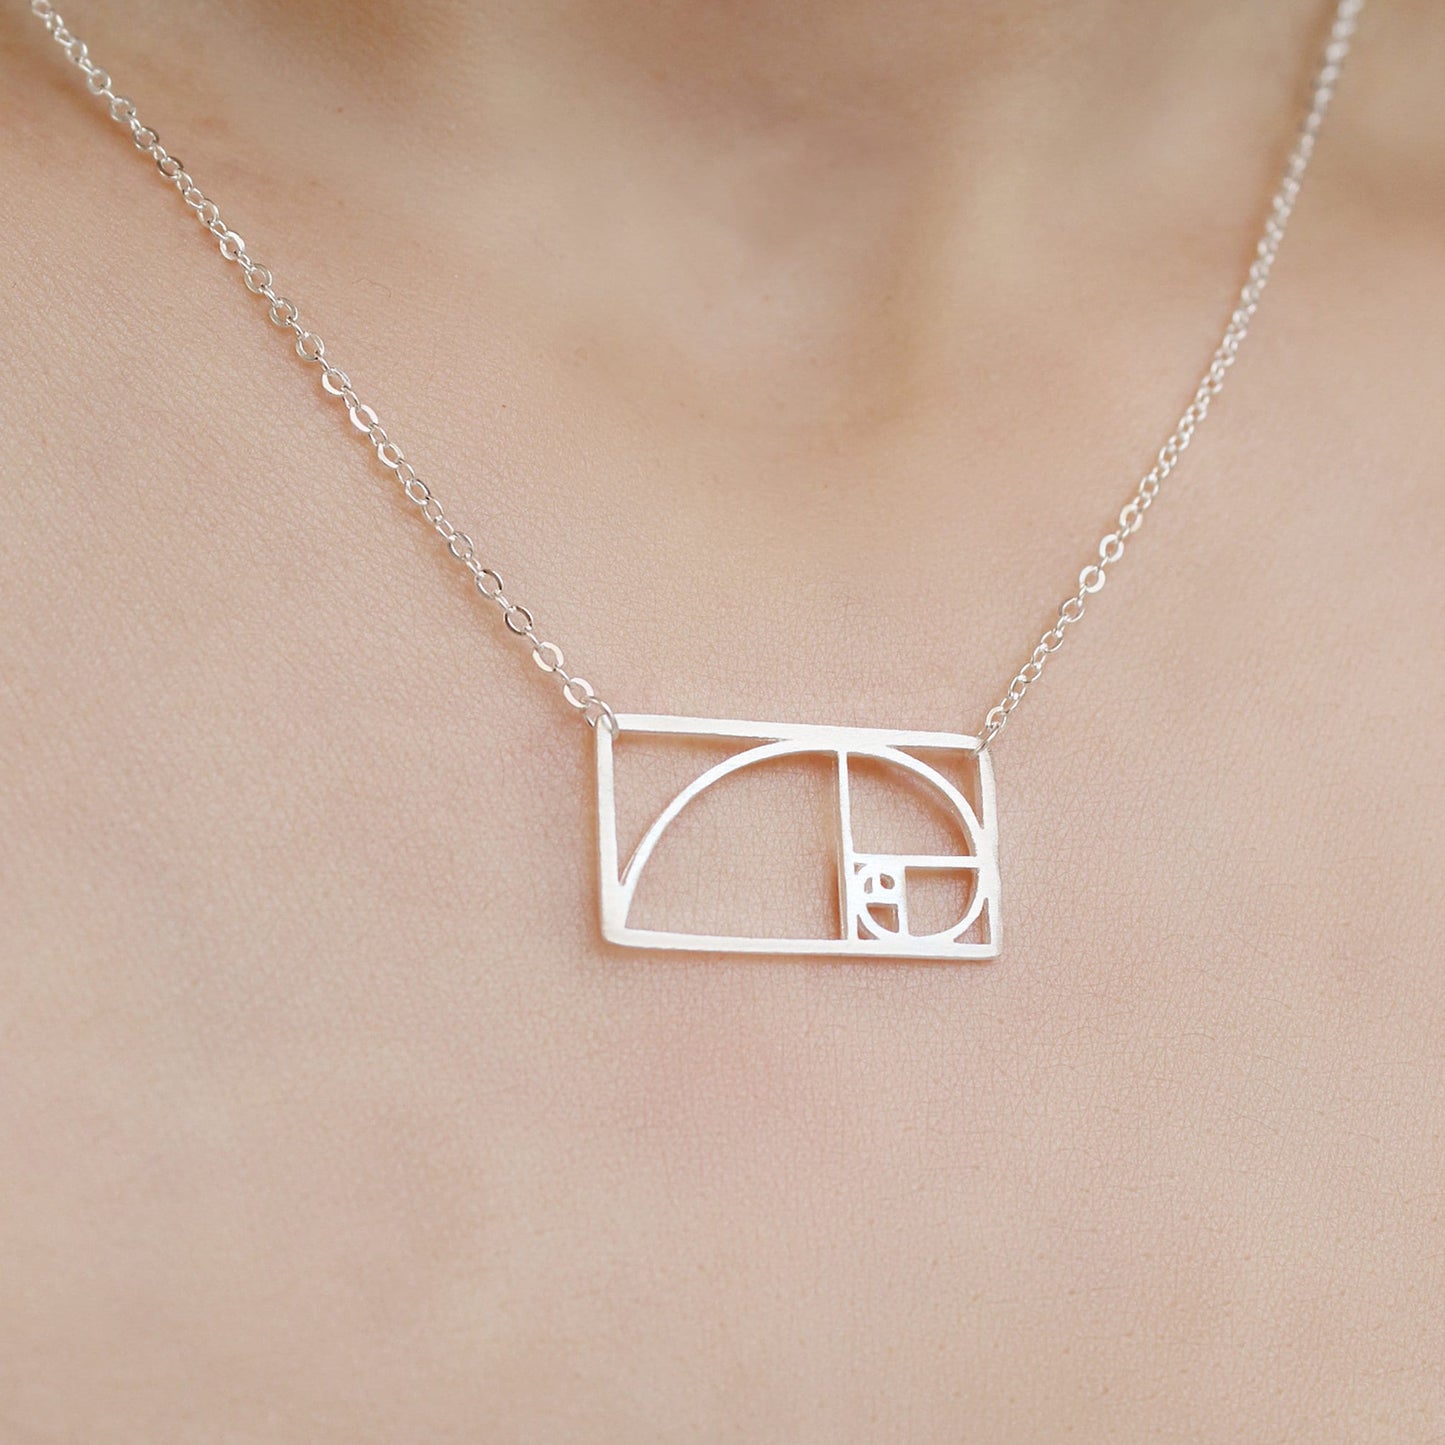 925 Sterling Silver Golden Ratio Pattern Necklace